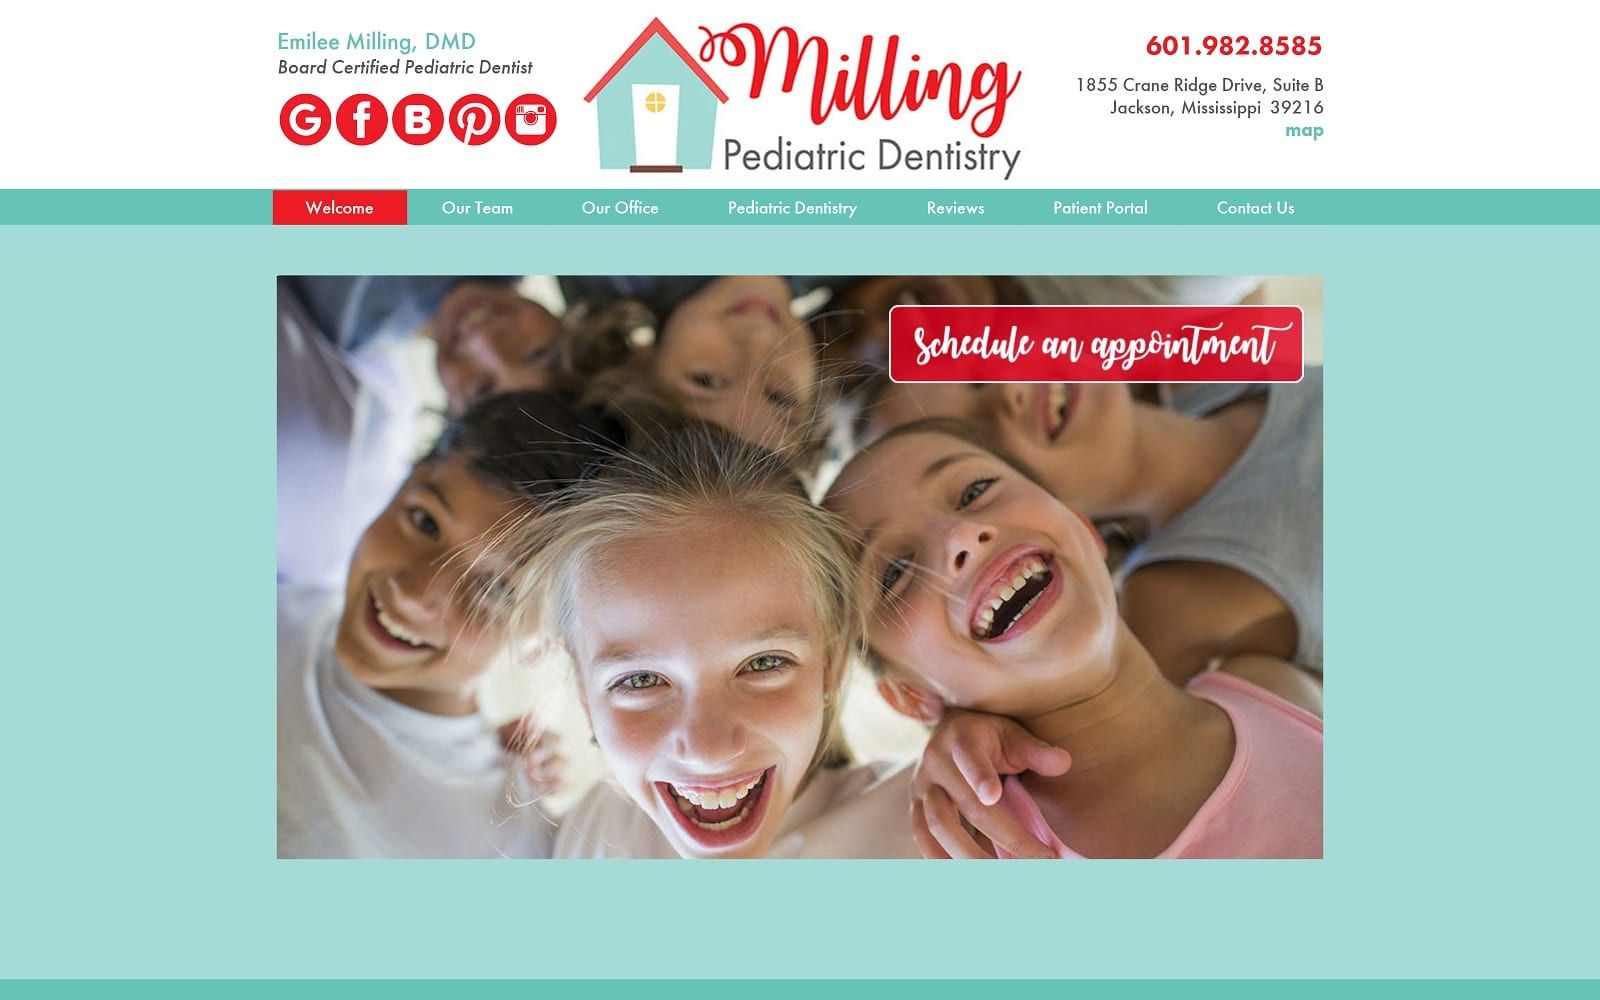 The screenshot of milling pediatric dentistry simmonsyoung. Com dr. Emilee milling website